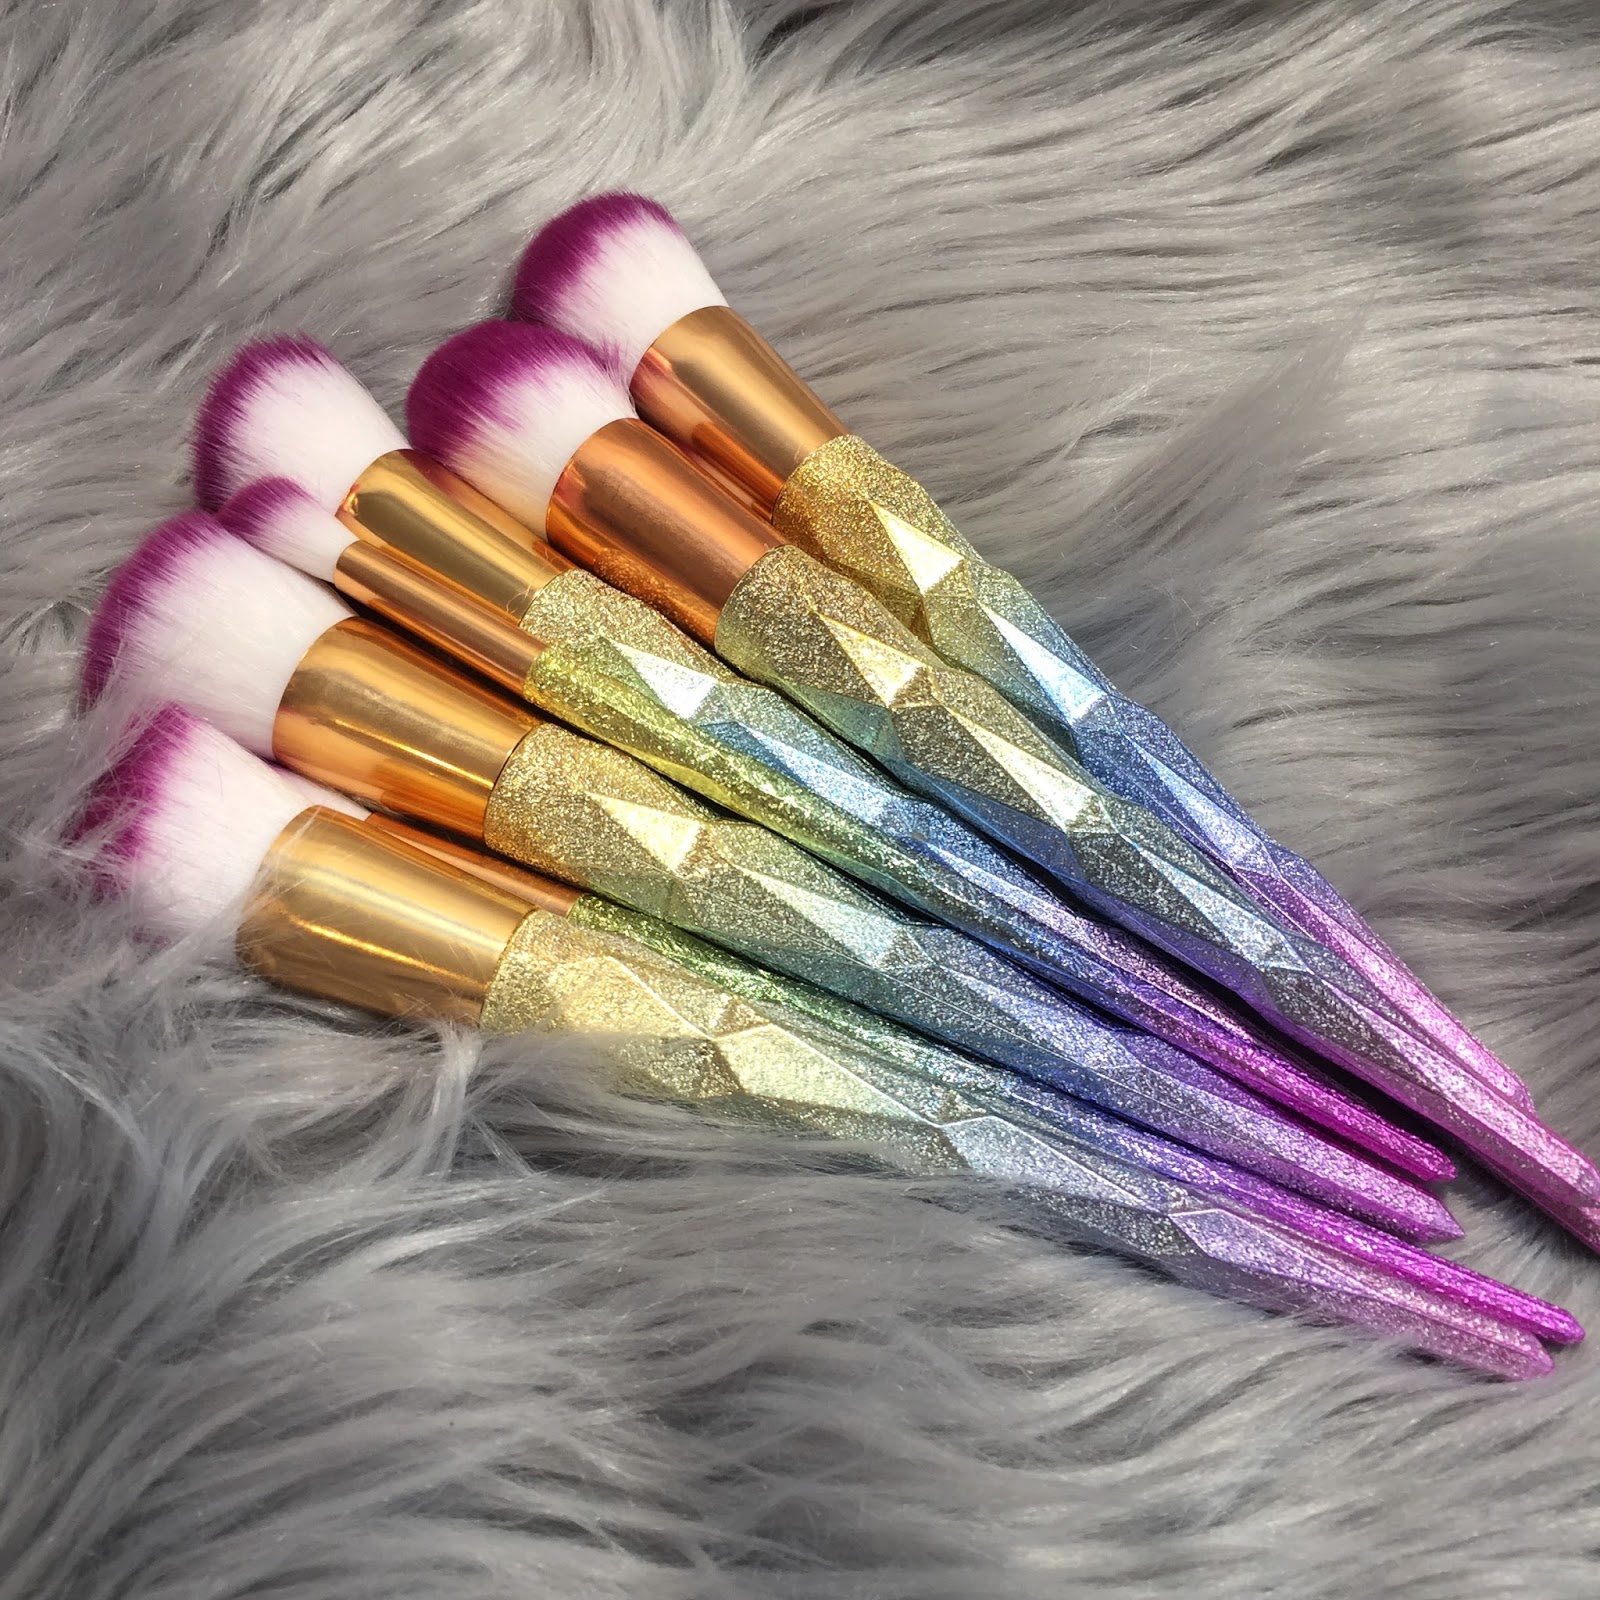 GLITTER MAKEUP BRUSHES with Gamiss & Zaful. | Kayleen beauty!